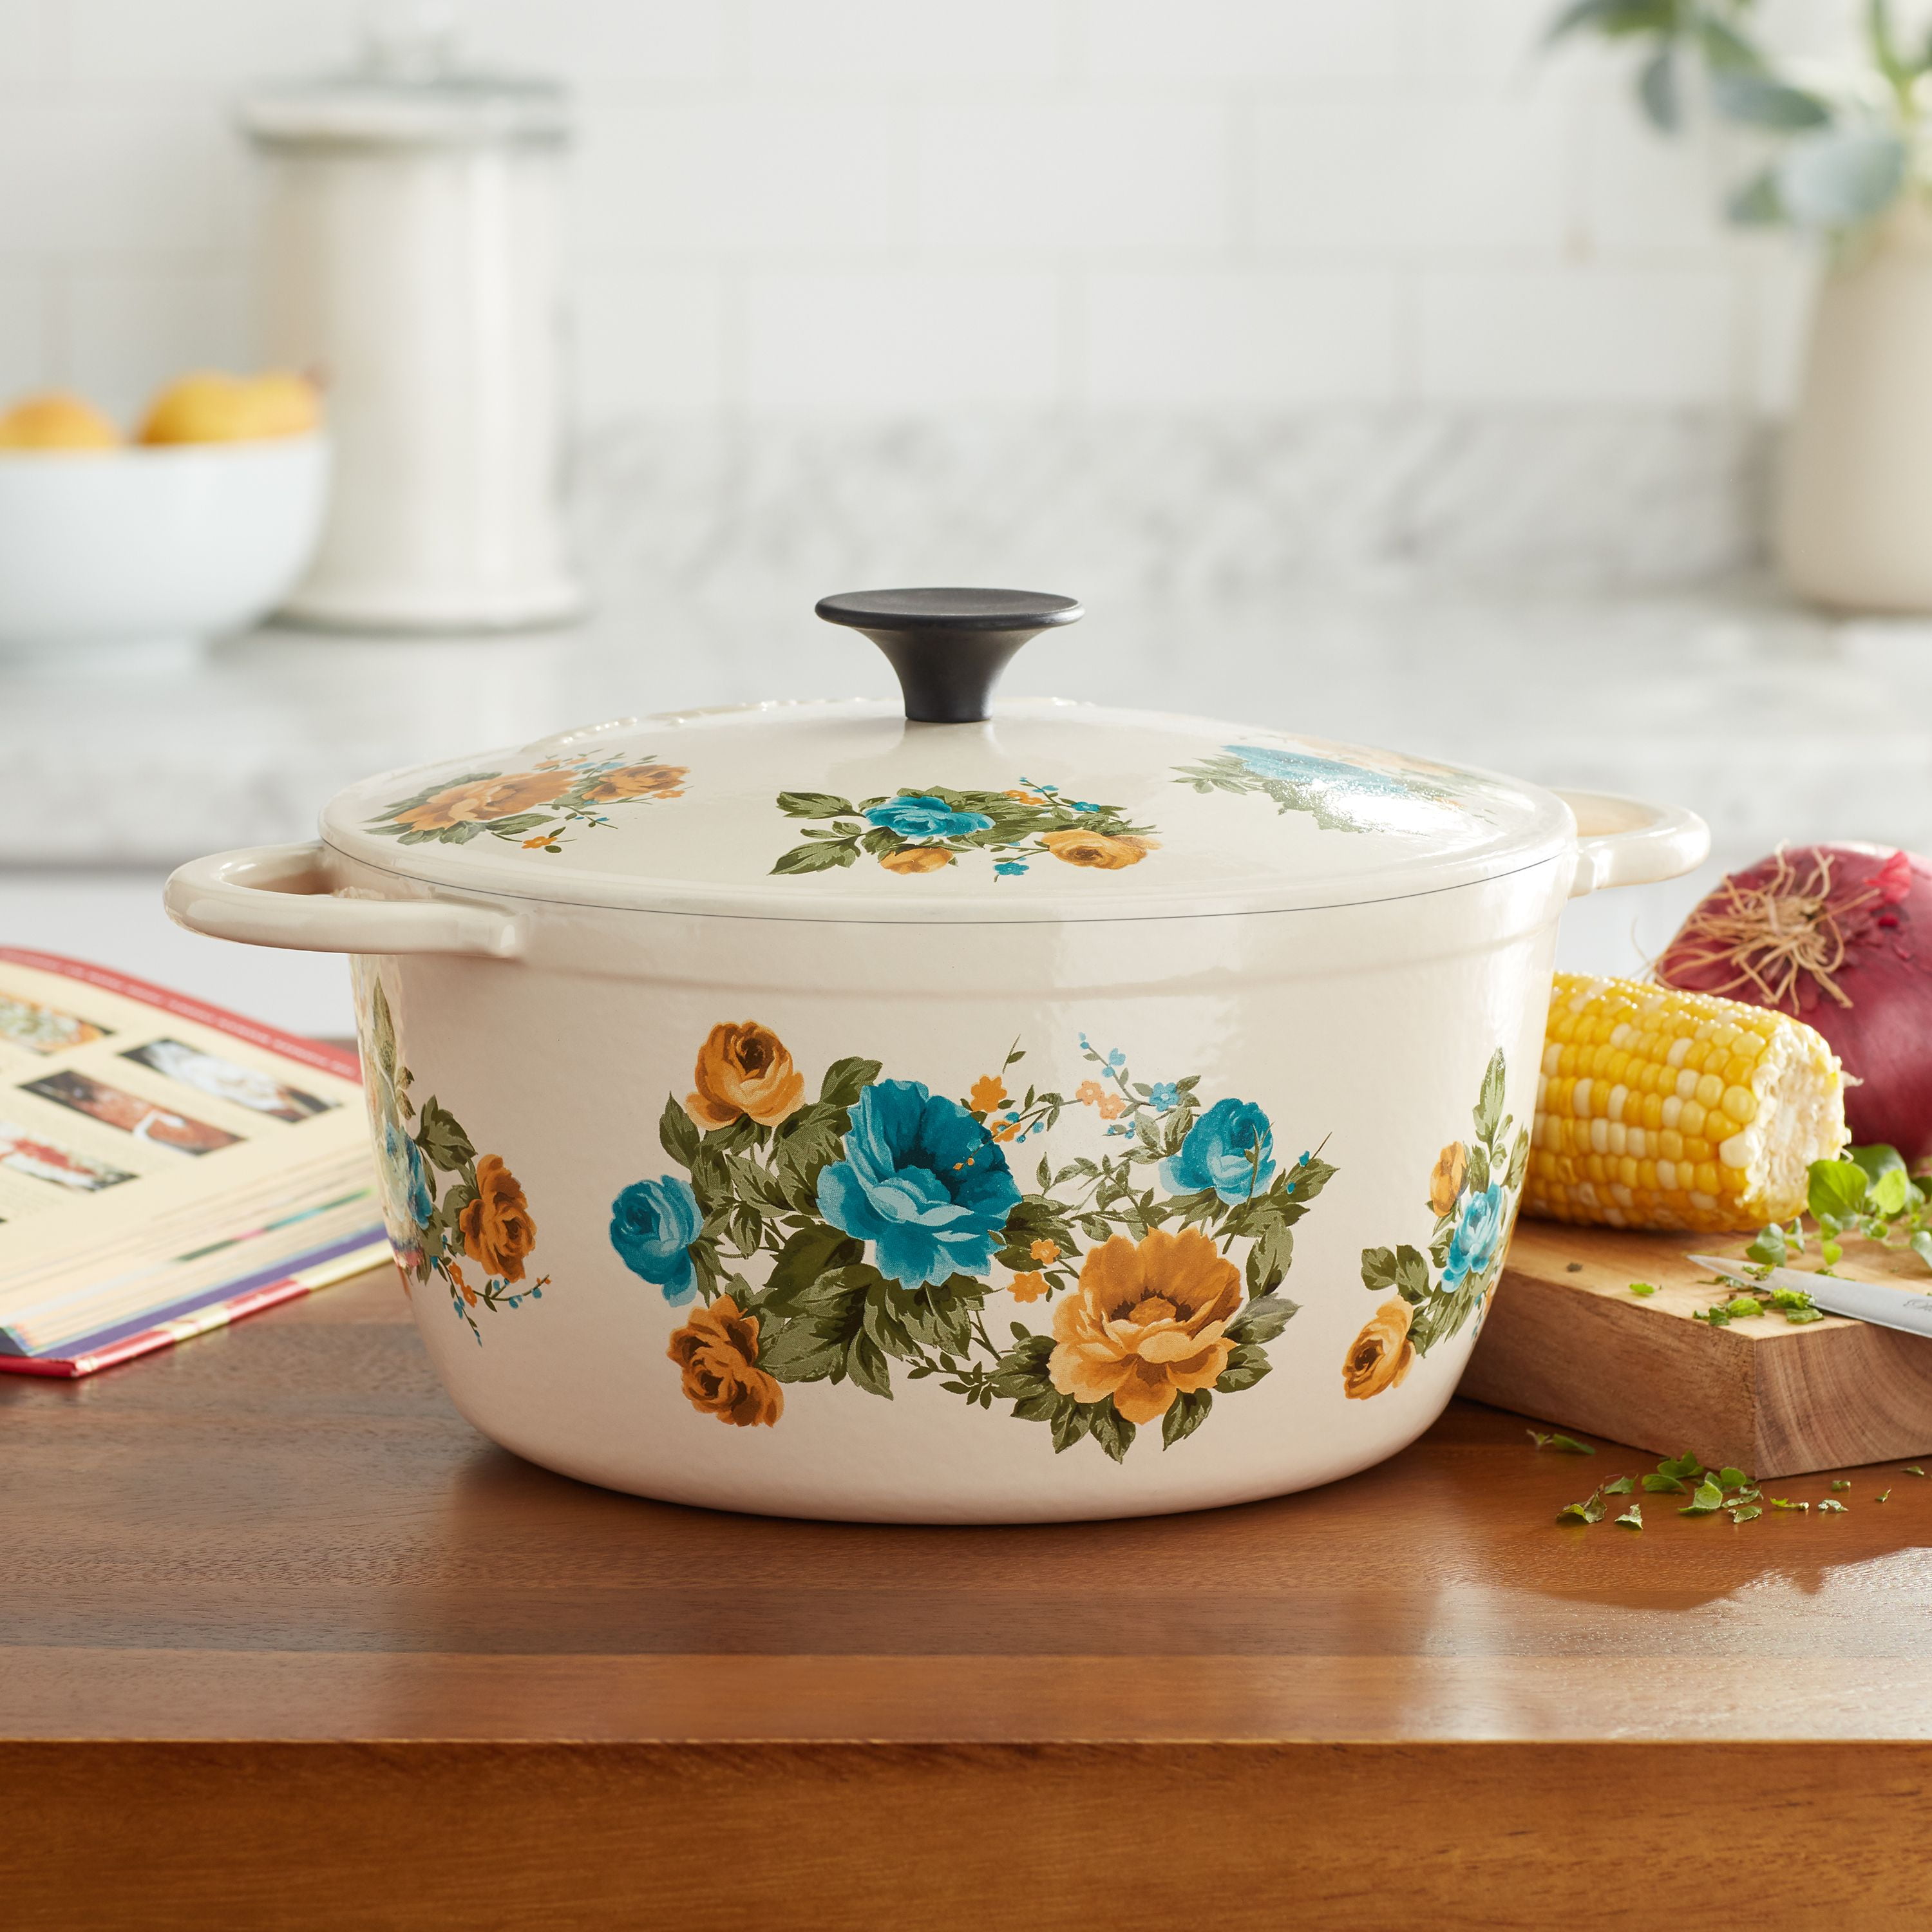 The Pioneer Woman's Vintage-Inspired Dutch Oven Is Only $40 – SheKnows